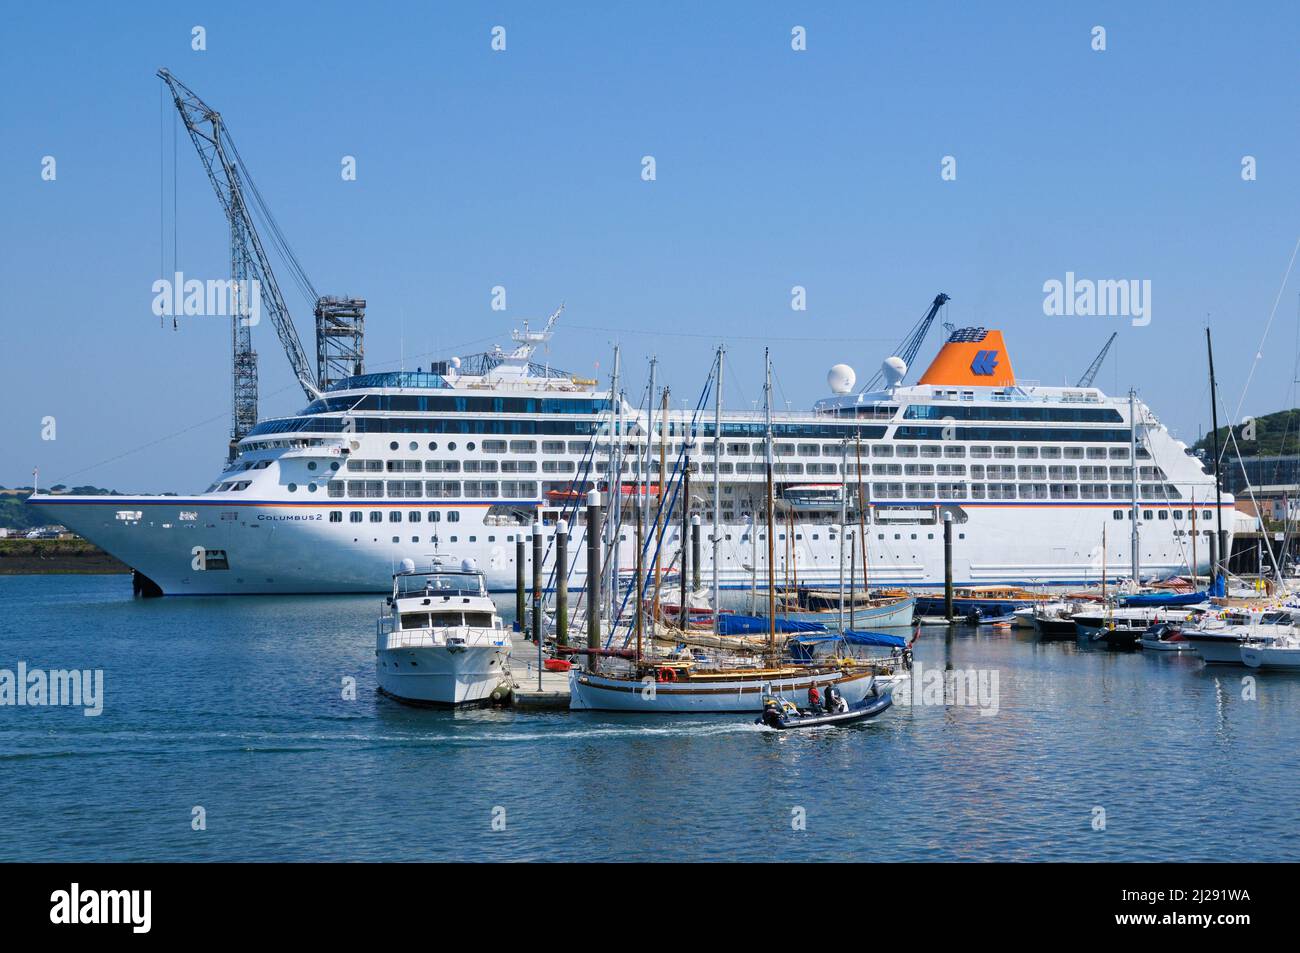 Luxury cruise ship docked in Falmouth Harbour dwarfing the sailing boats in Port Pendennis Marina, Falmouth, Cornwall, England, UK Stock Photo